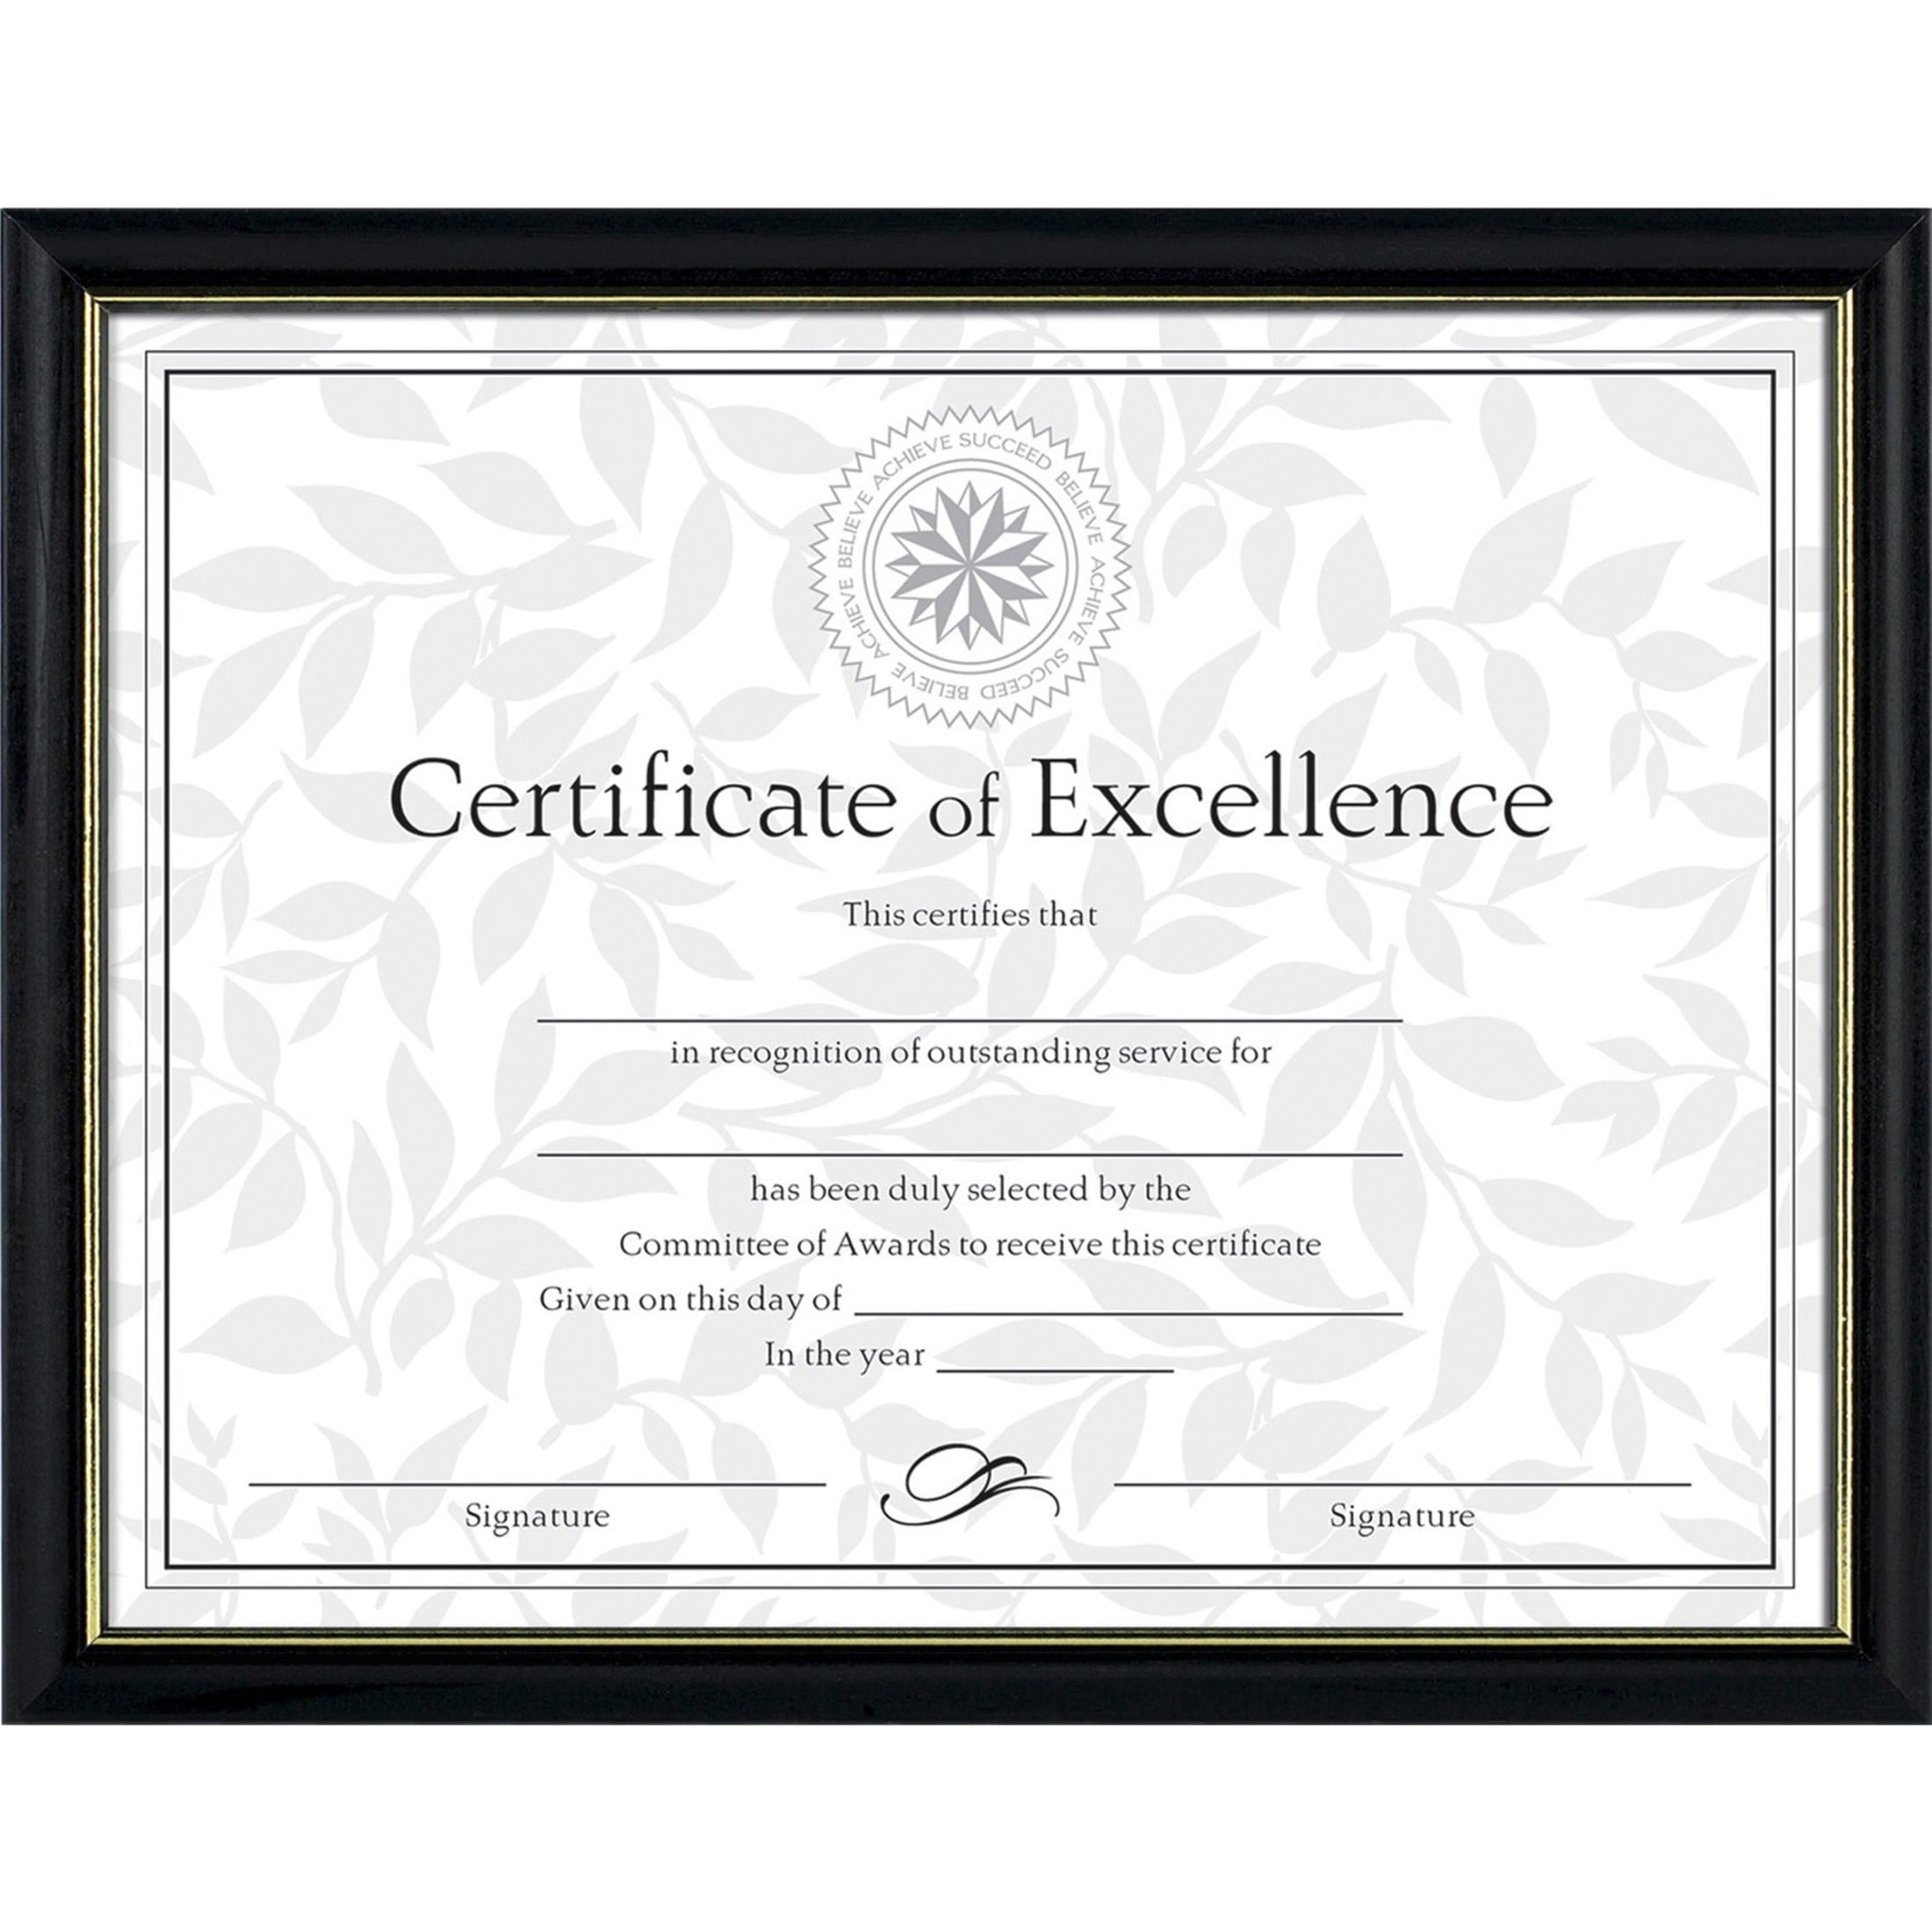 Pack of 6 MCS Economy Document Frames 8-1/2x11 Black with Gold Trim 